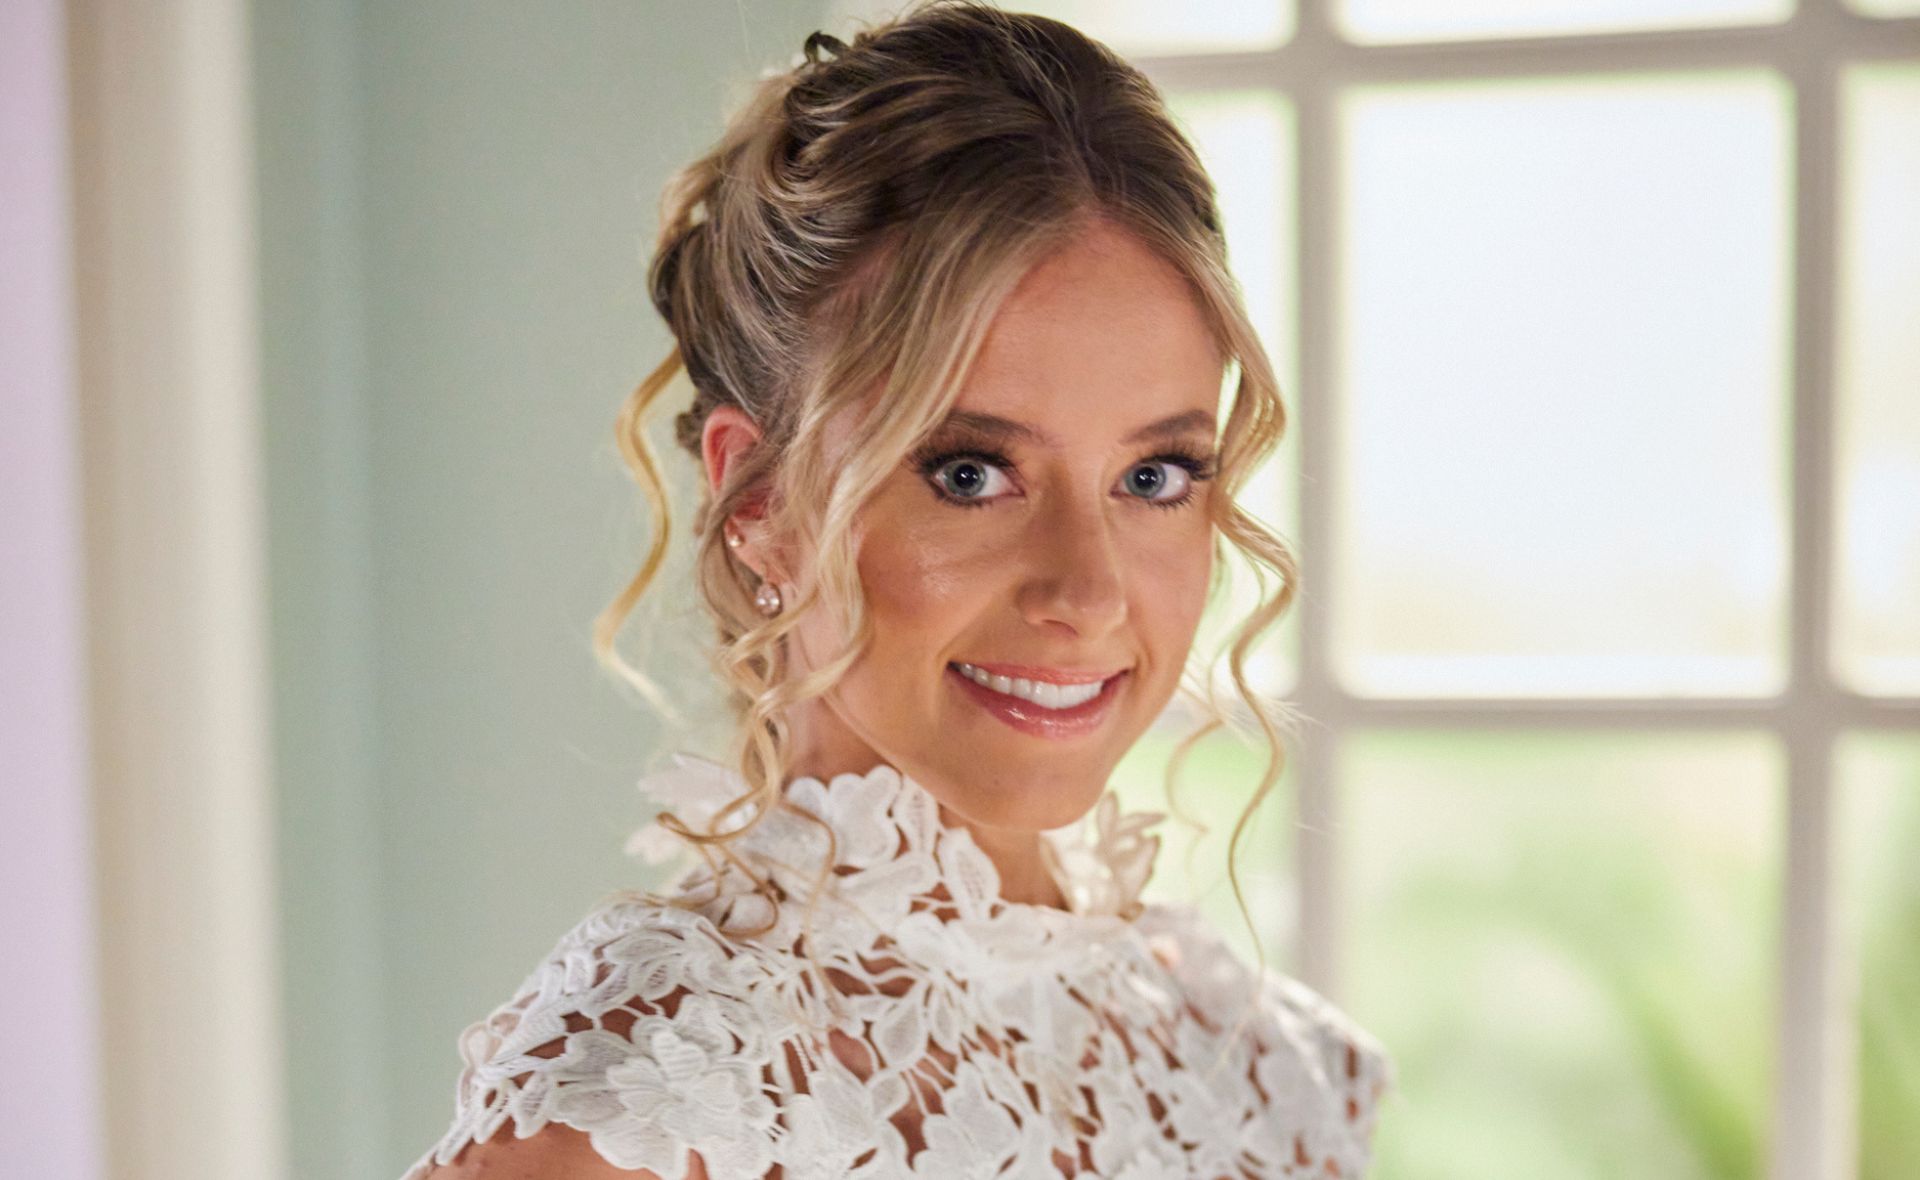 HOME AND AWAY: Tane and Felicity’s wedding day is near, but is all as it seems?